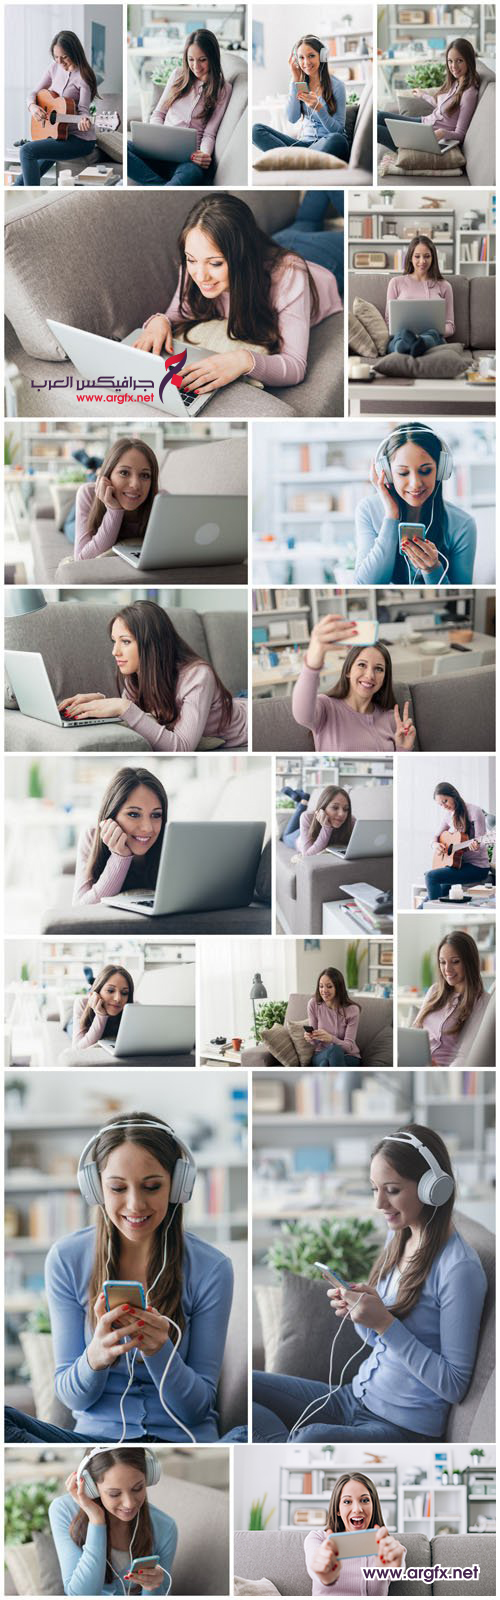 Beautiful young girl works with the smartphone and a laptop 2 - 20xUHQ JPEG Photo Stock